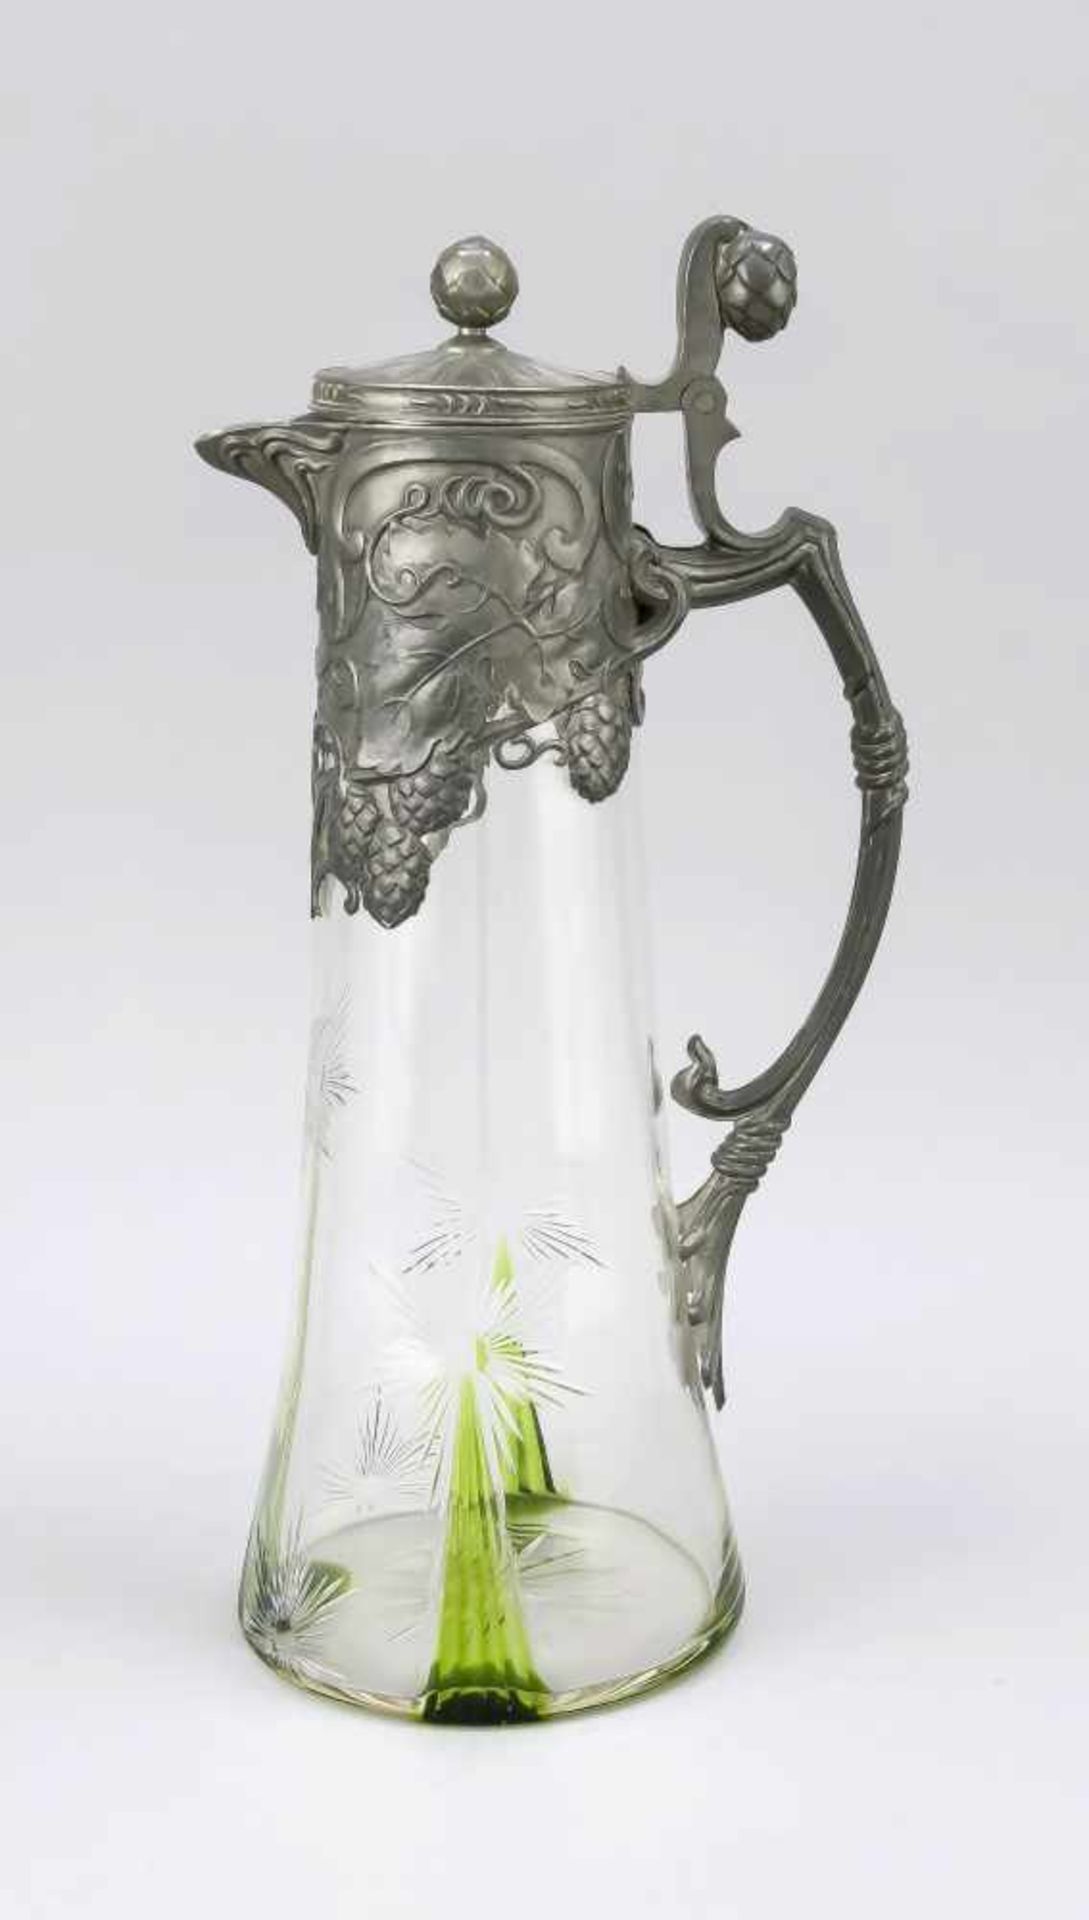 Large jug with pewter mounting, around 1900, round stand, body with tapered wall, clear